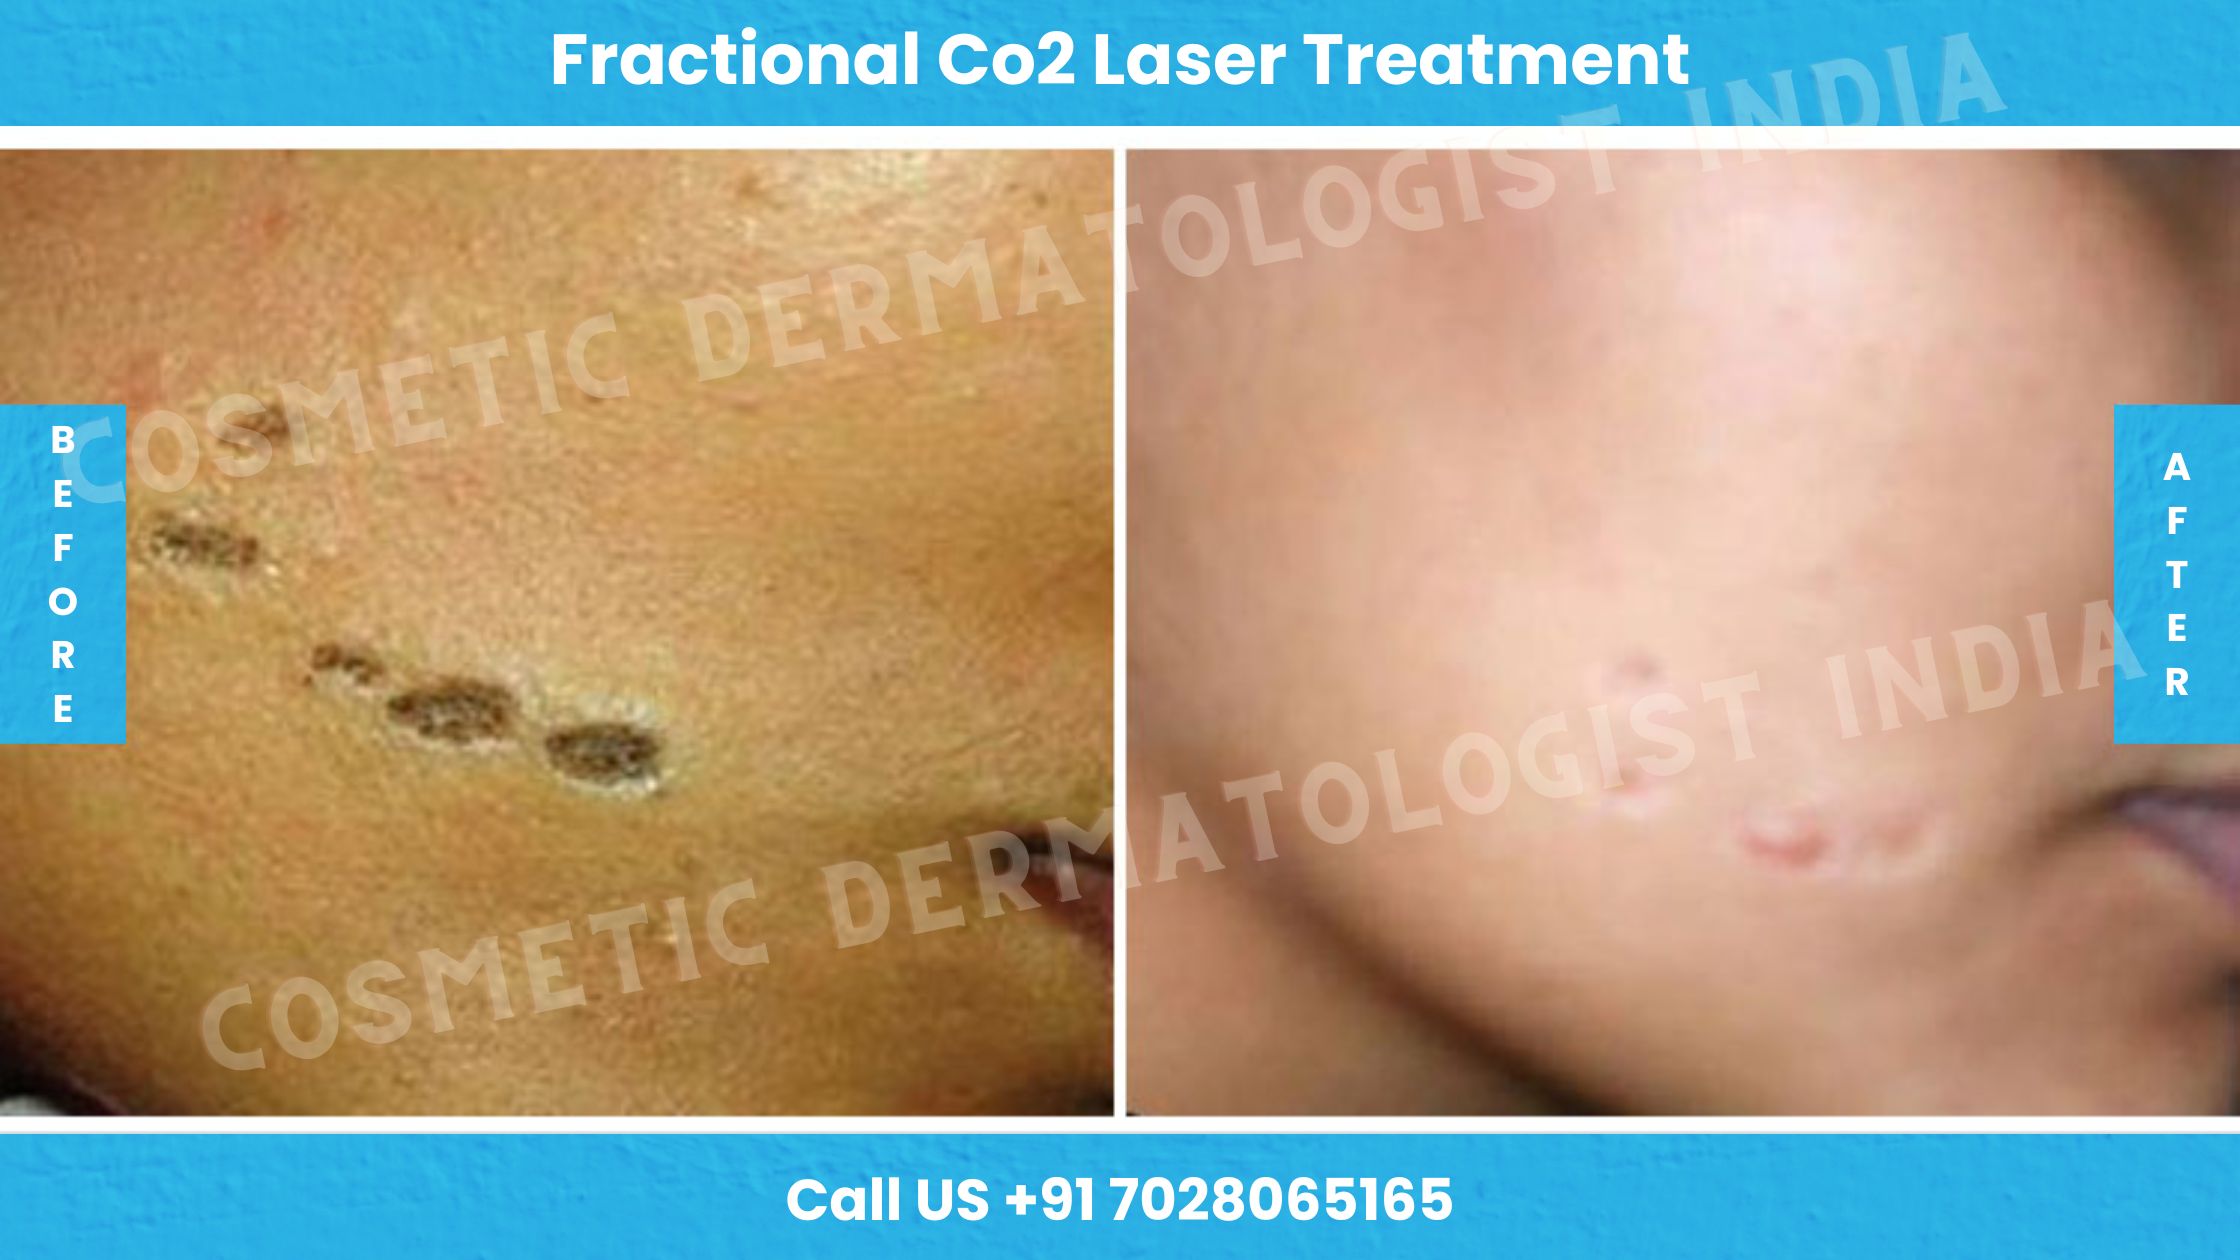 Before and After Images of Fractional CO2 Laser Treatment 